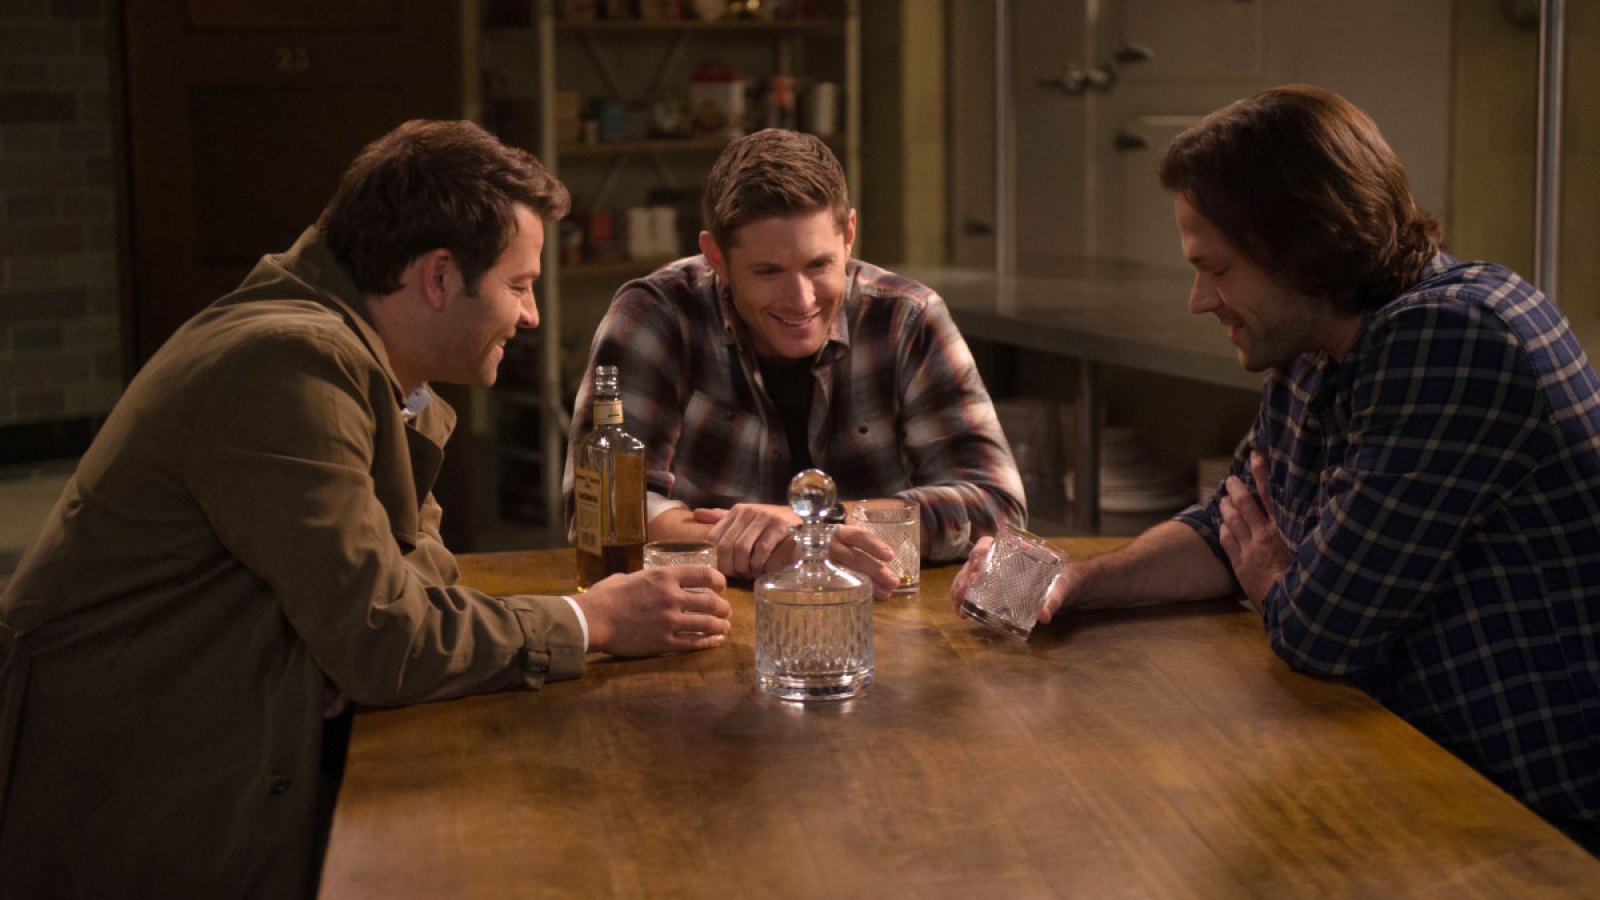 Supernatural' Will End After Season 15